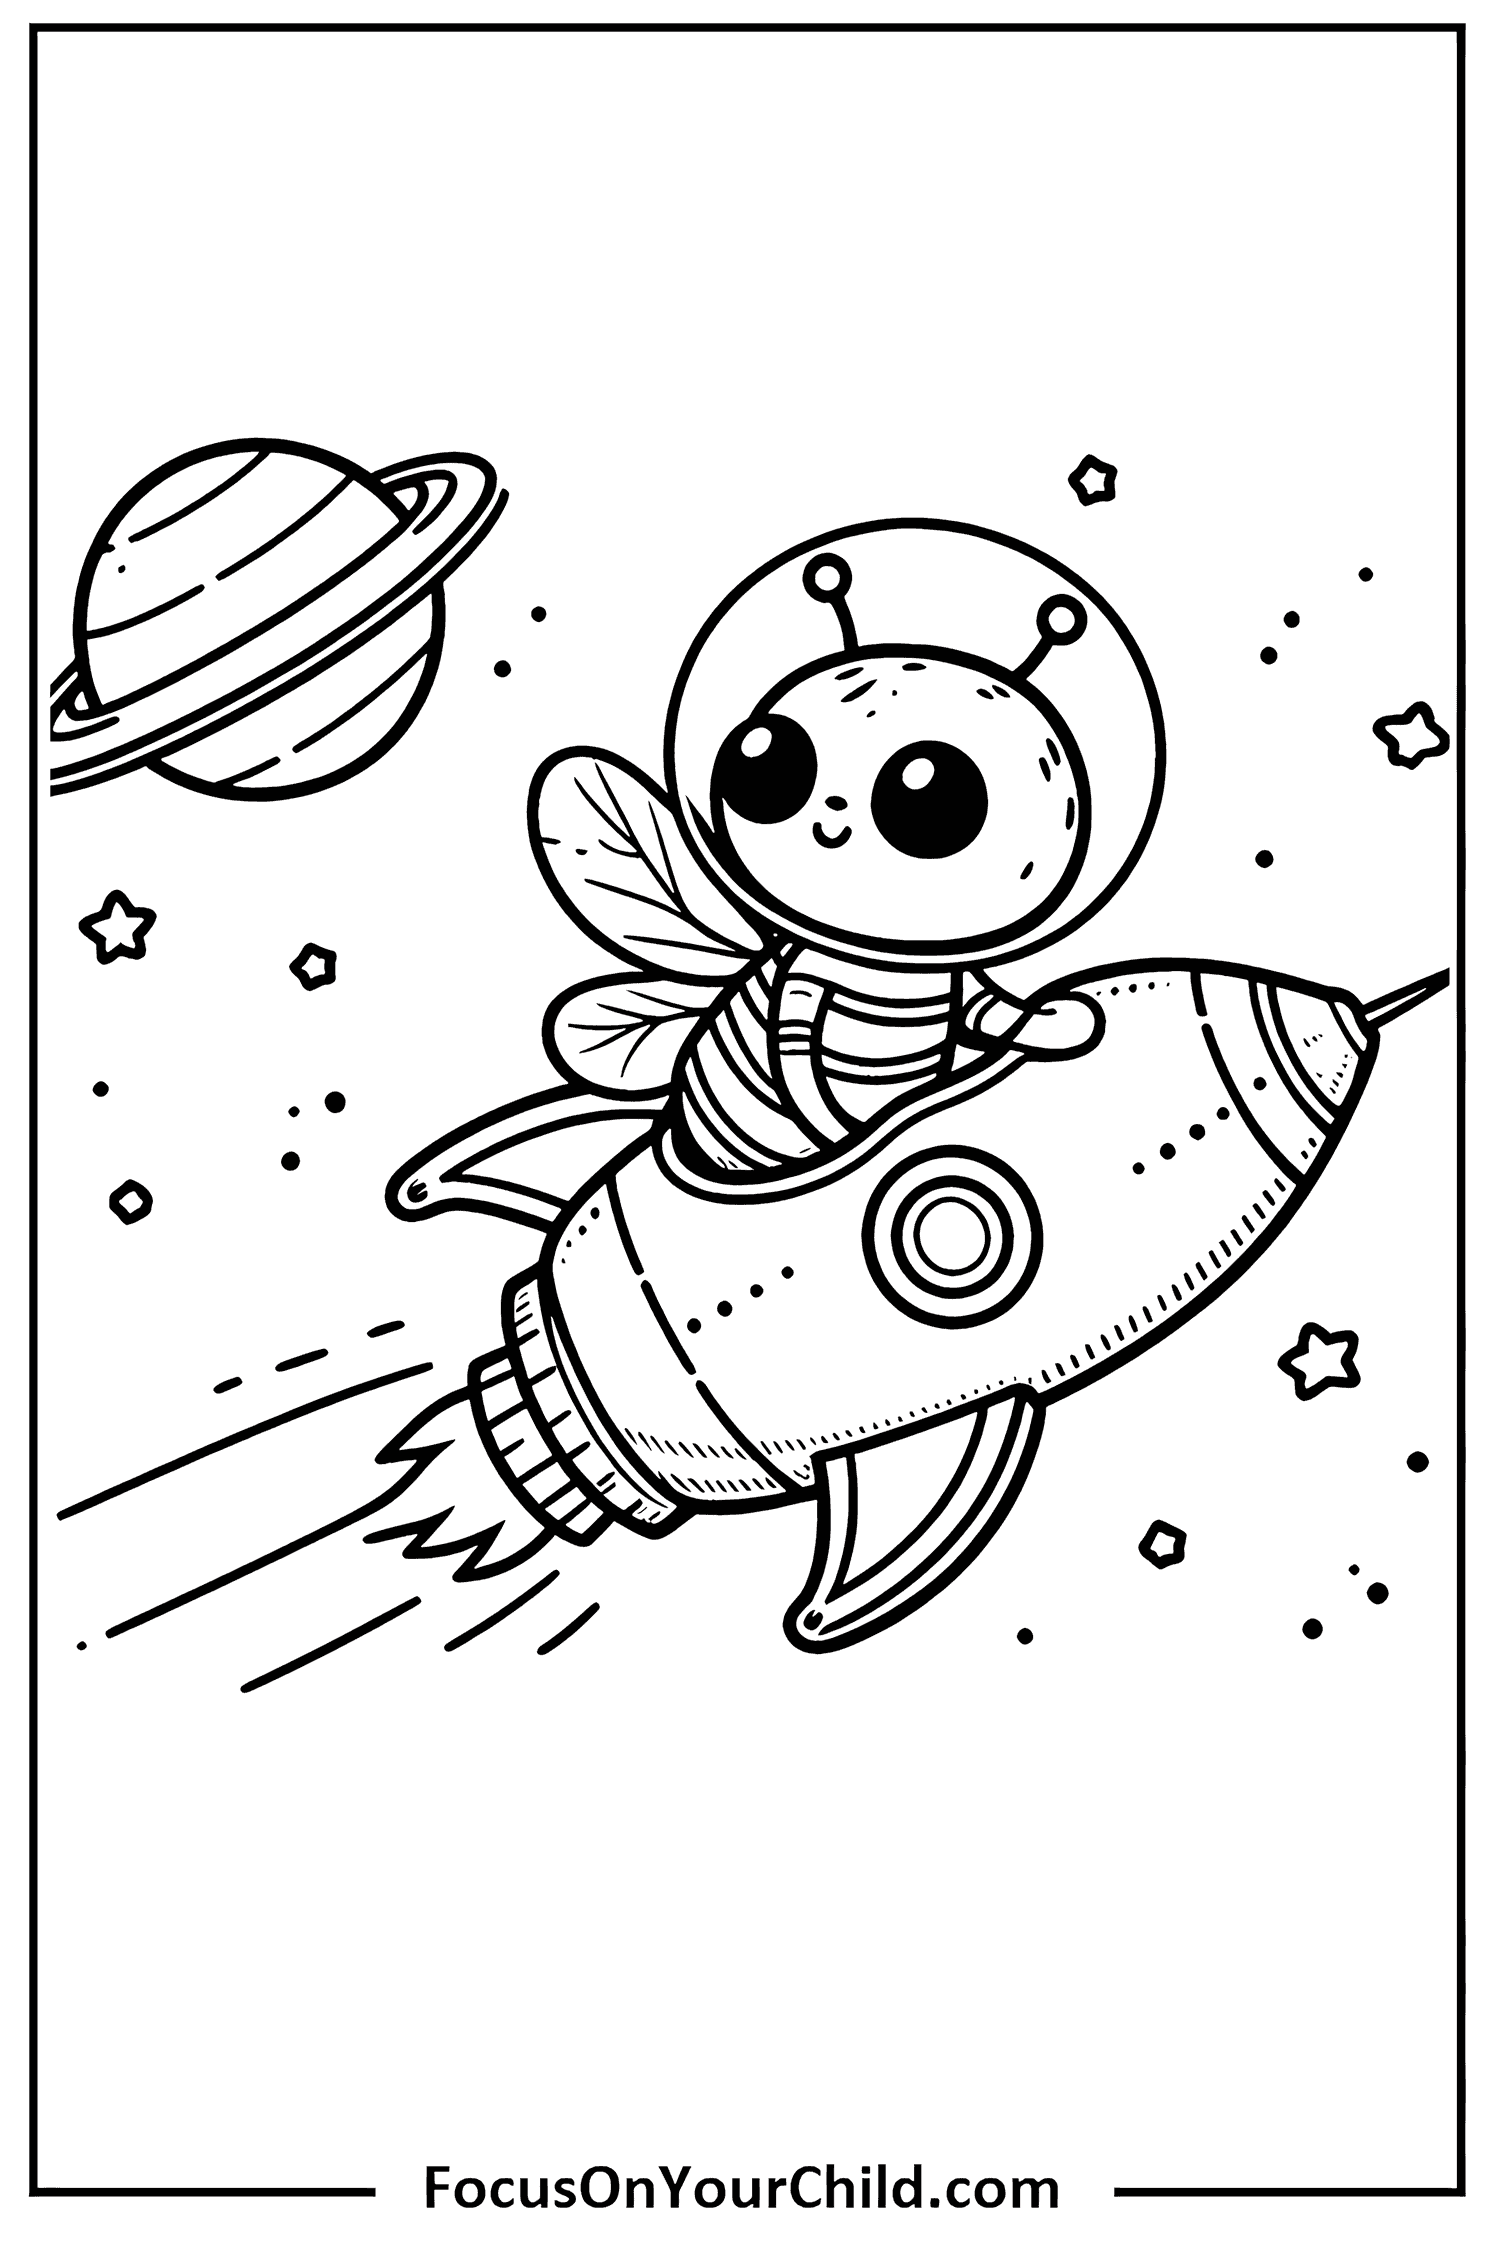 Adorable astronaut bee riding rocket in space illustration for childrens coloring book.